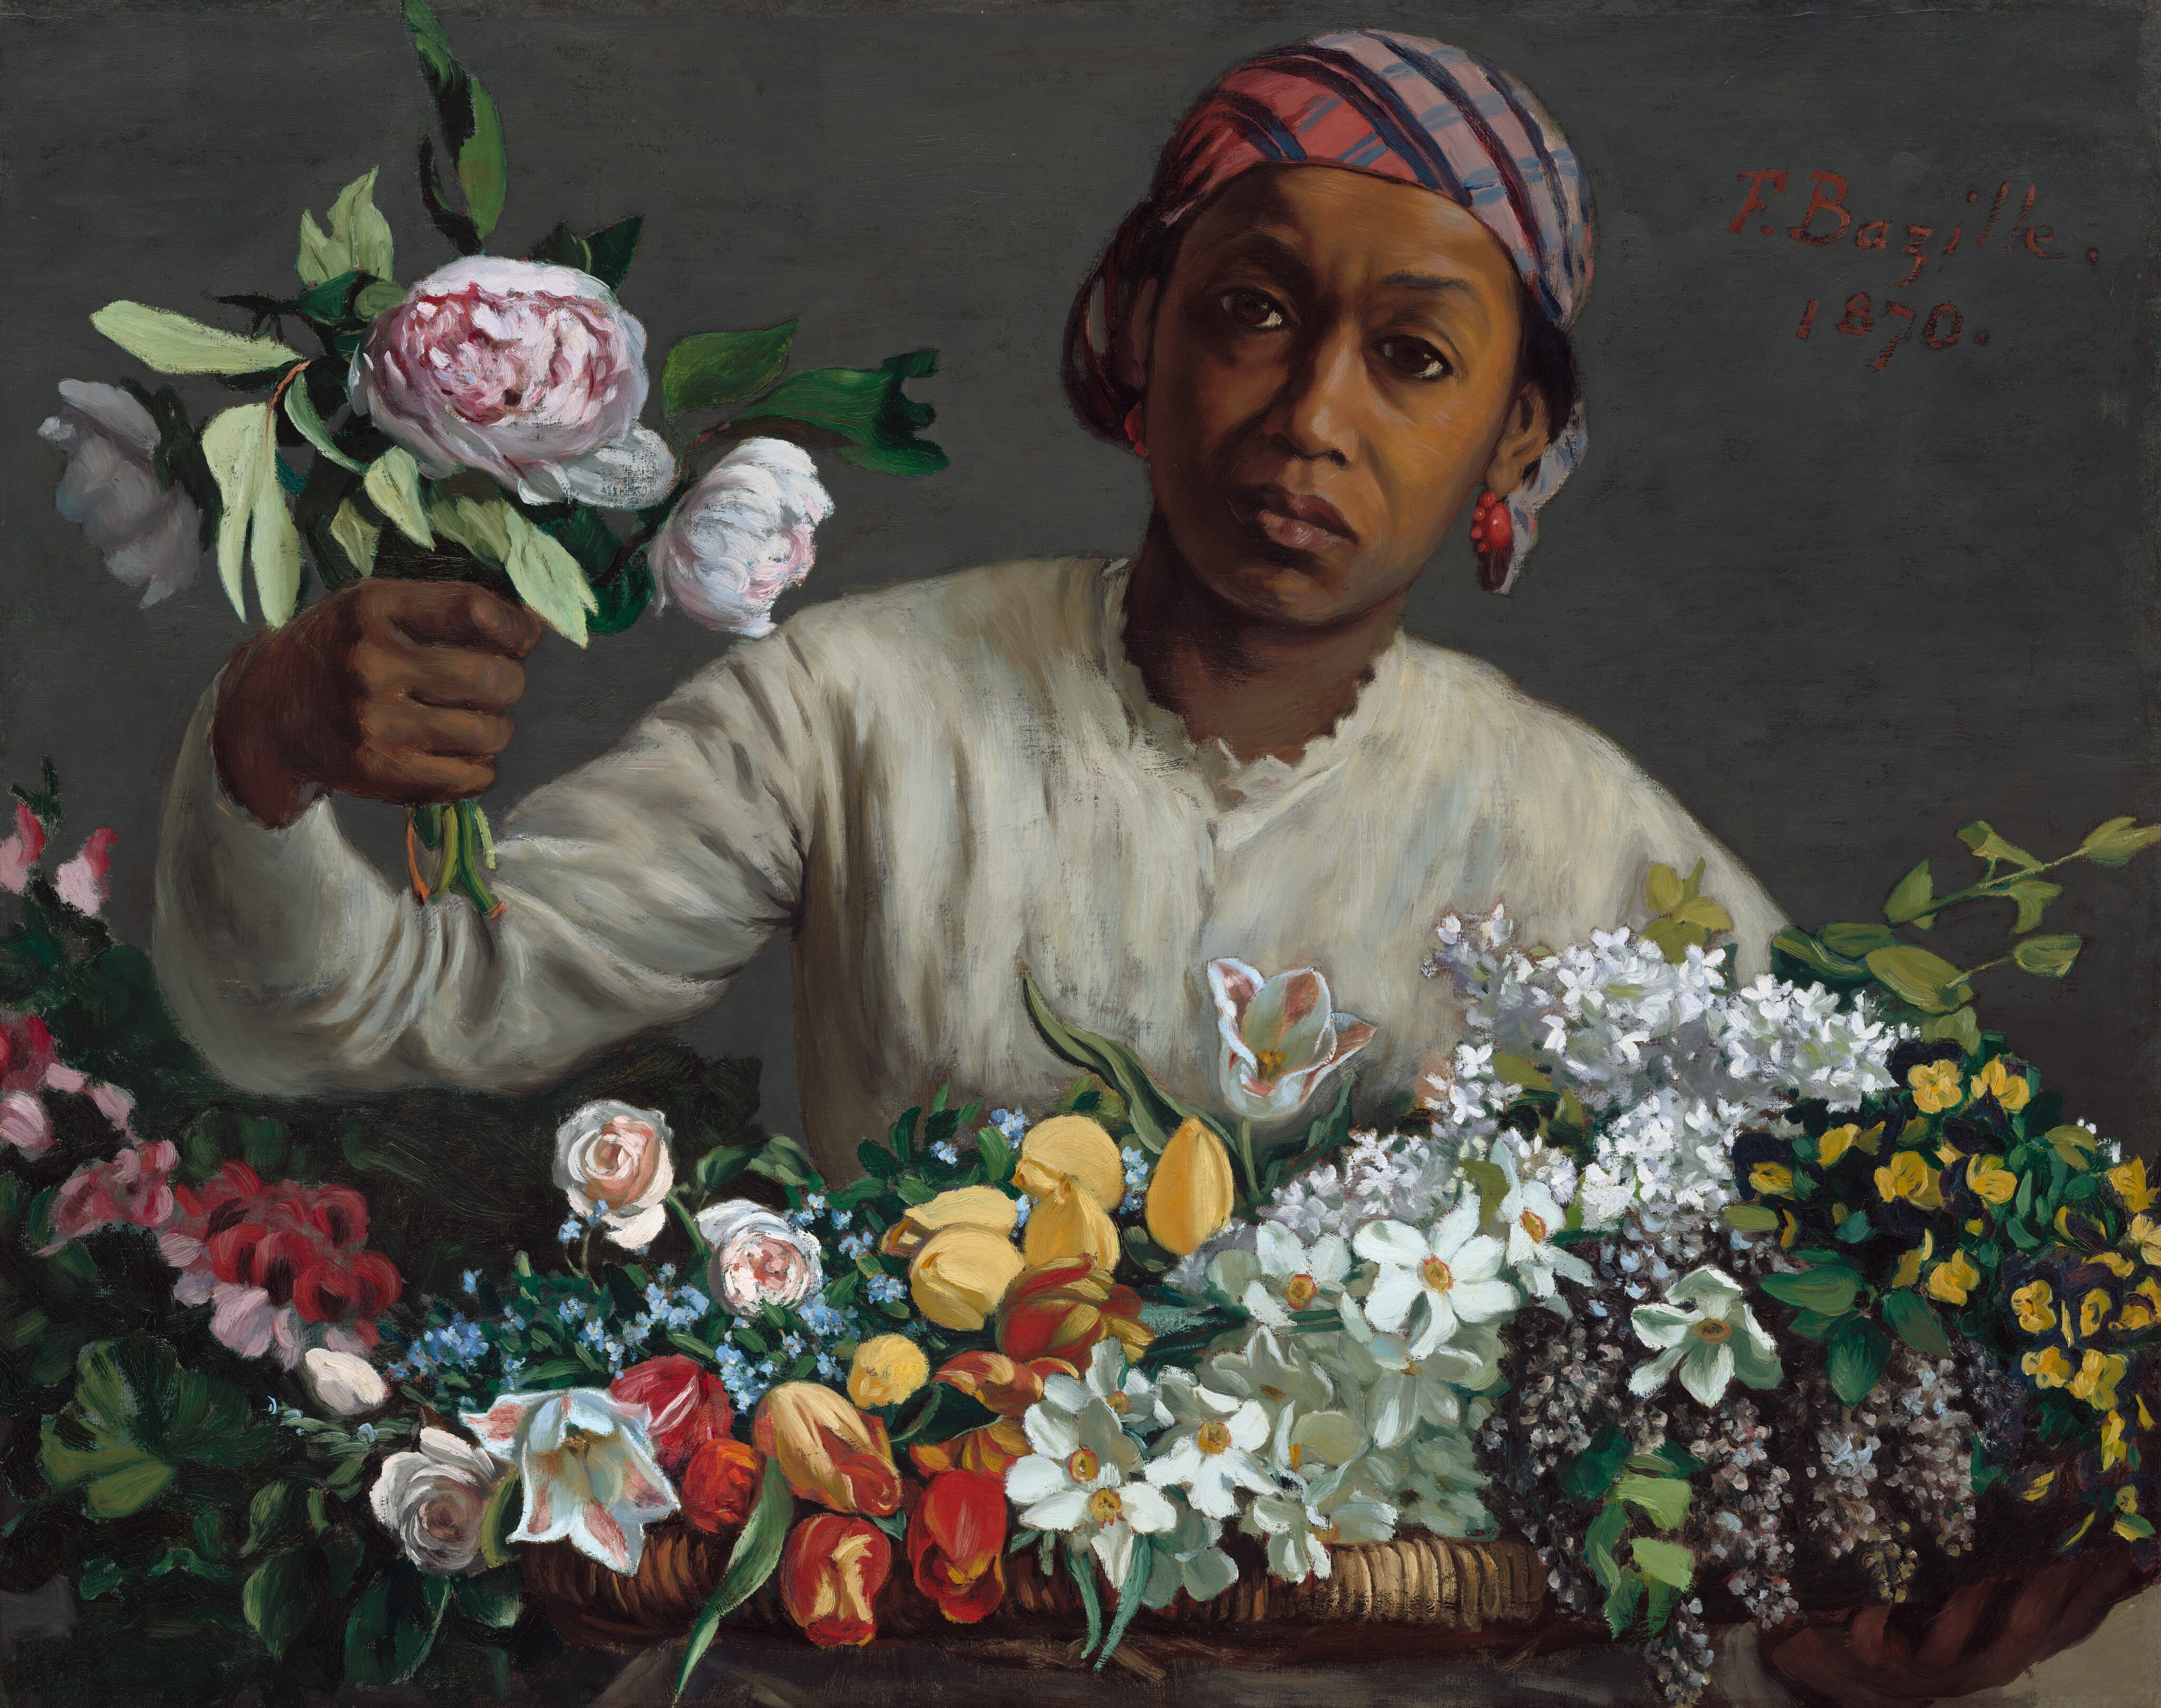 Young Woman with Peonies by Frédéric Bazille - 1870 - 60 x 75 cm National Gallery of Art